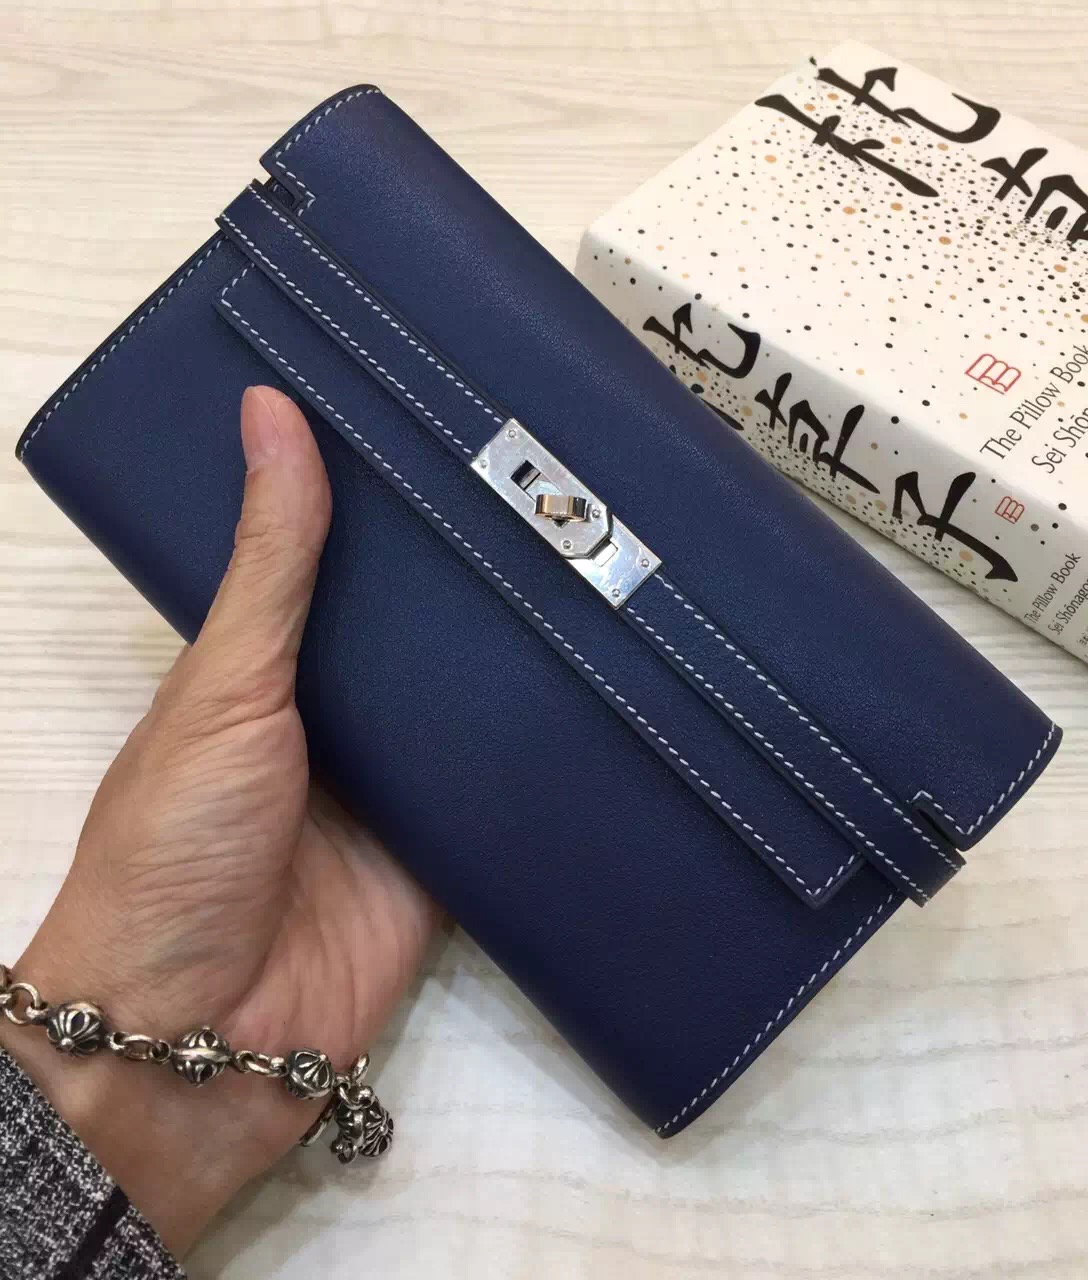 Discount Hermes Constance Wallet 7A Royal Blue Swift Leather ...  